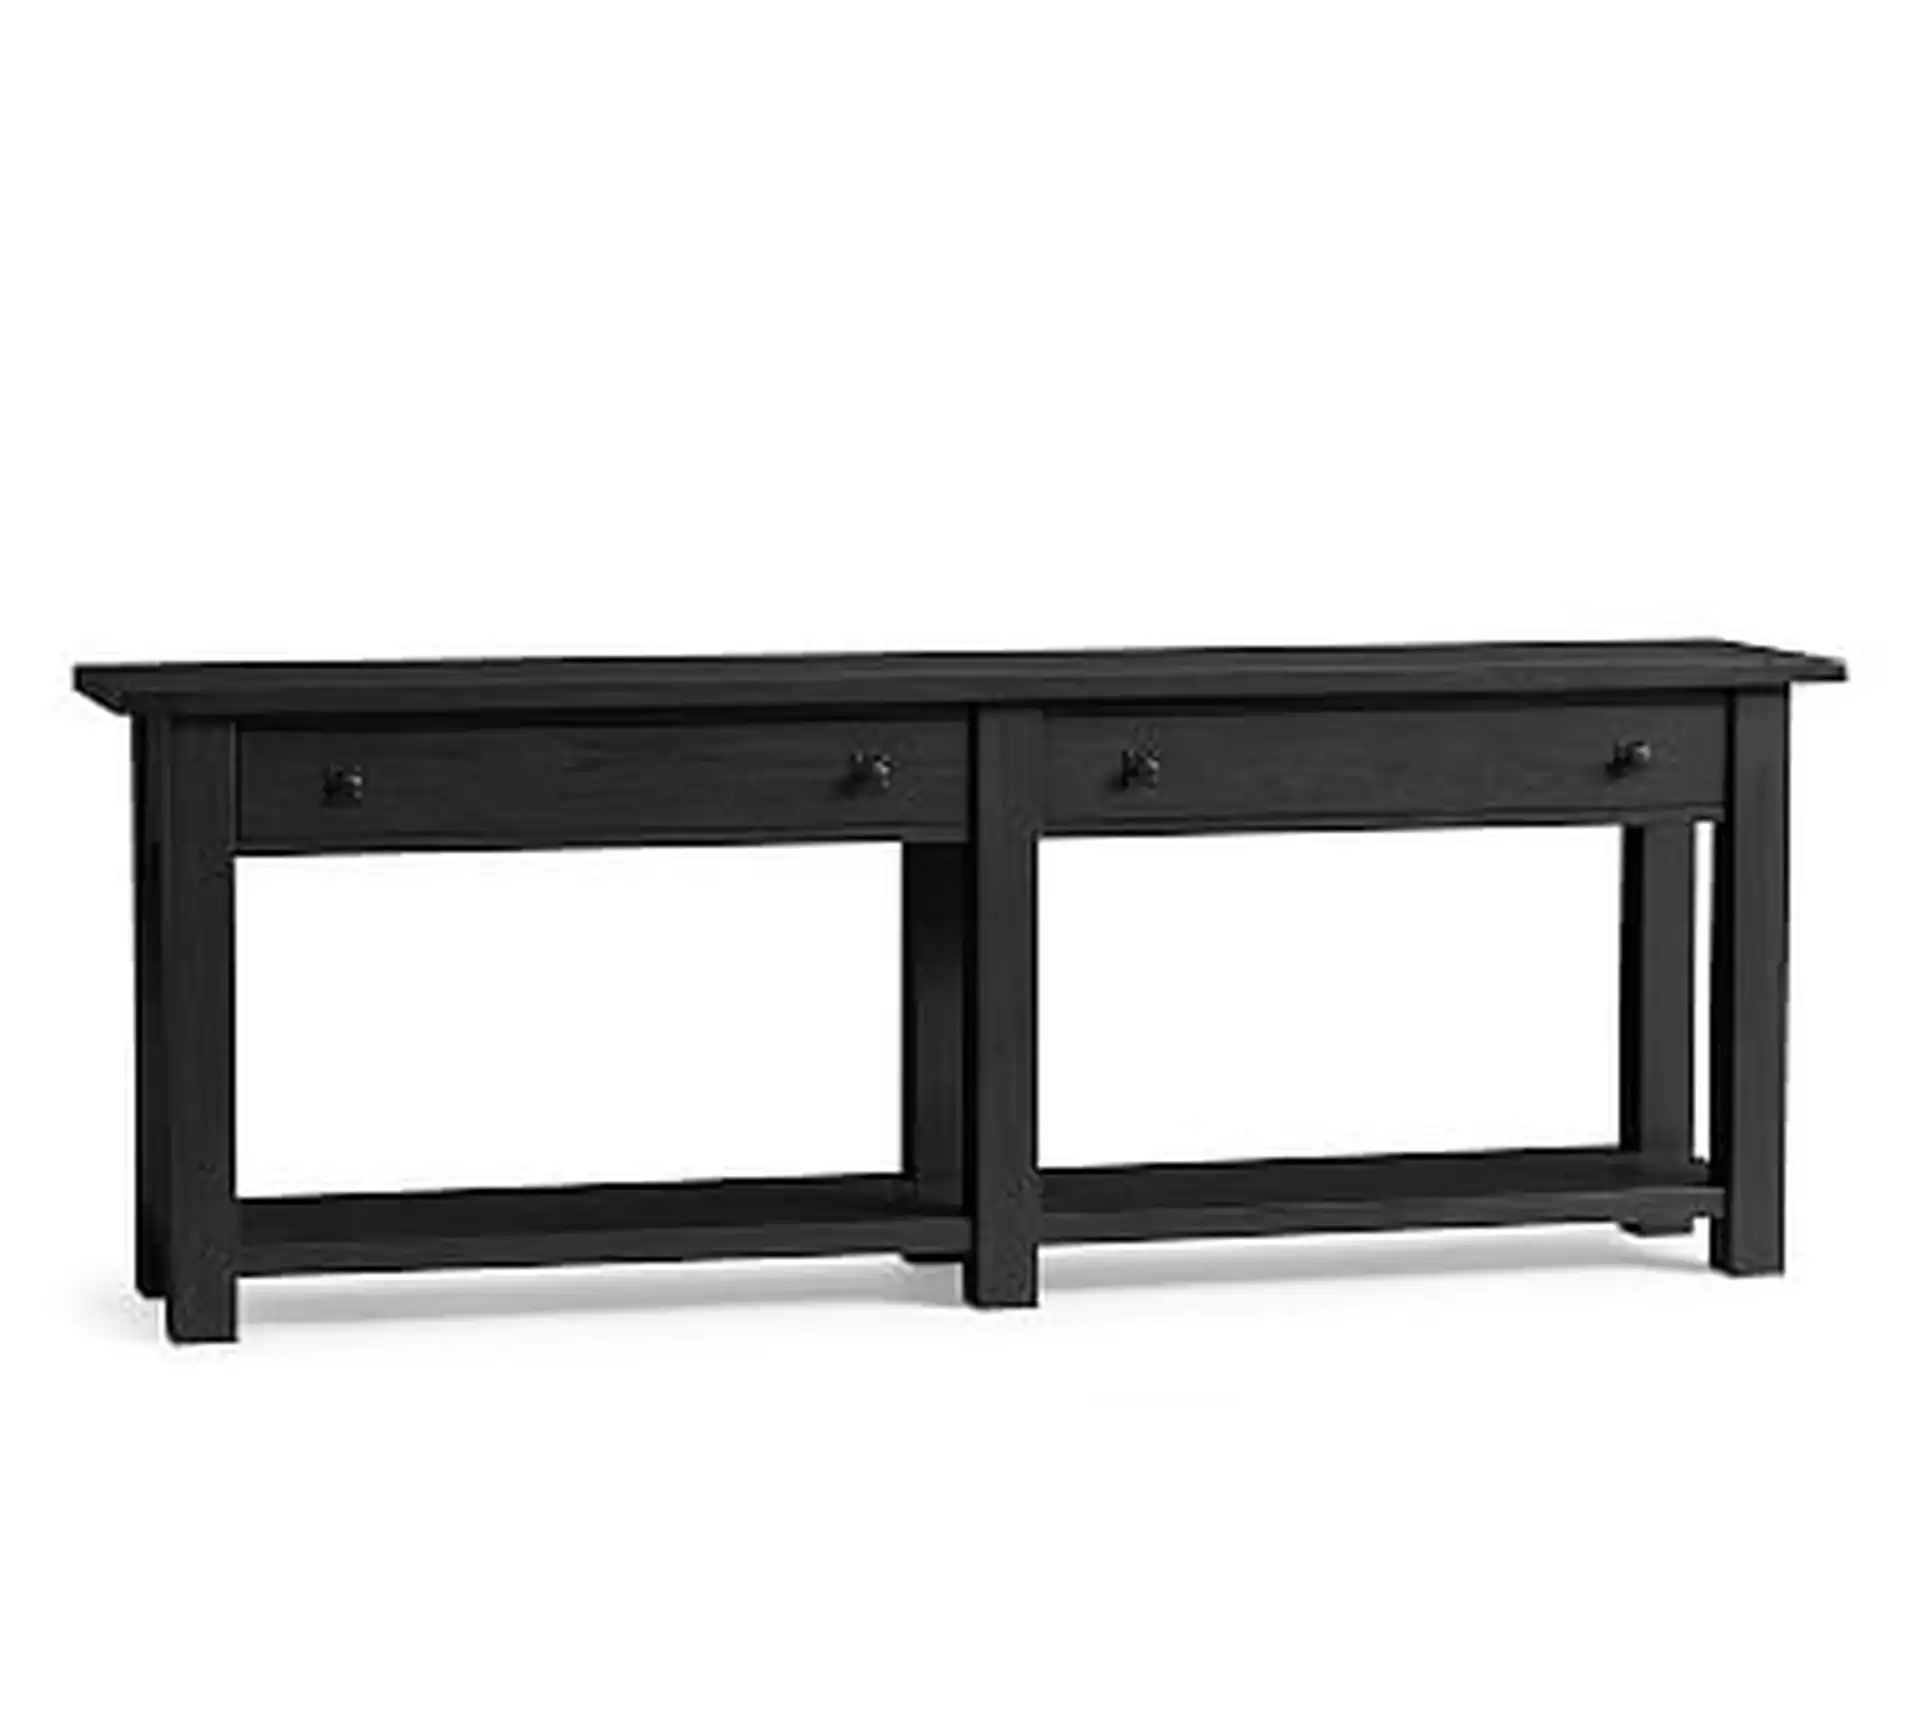 Benchwright Grand Console Table, Blackened Oak